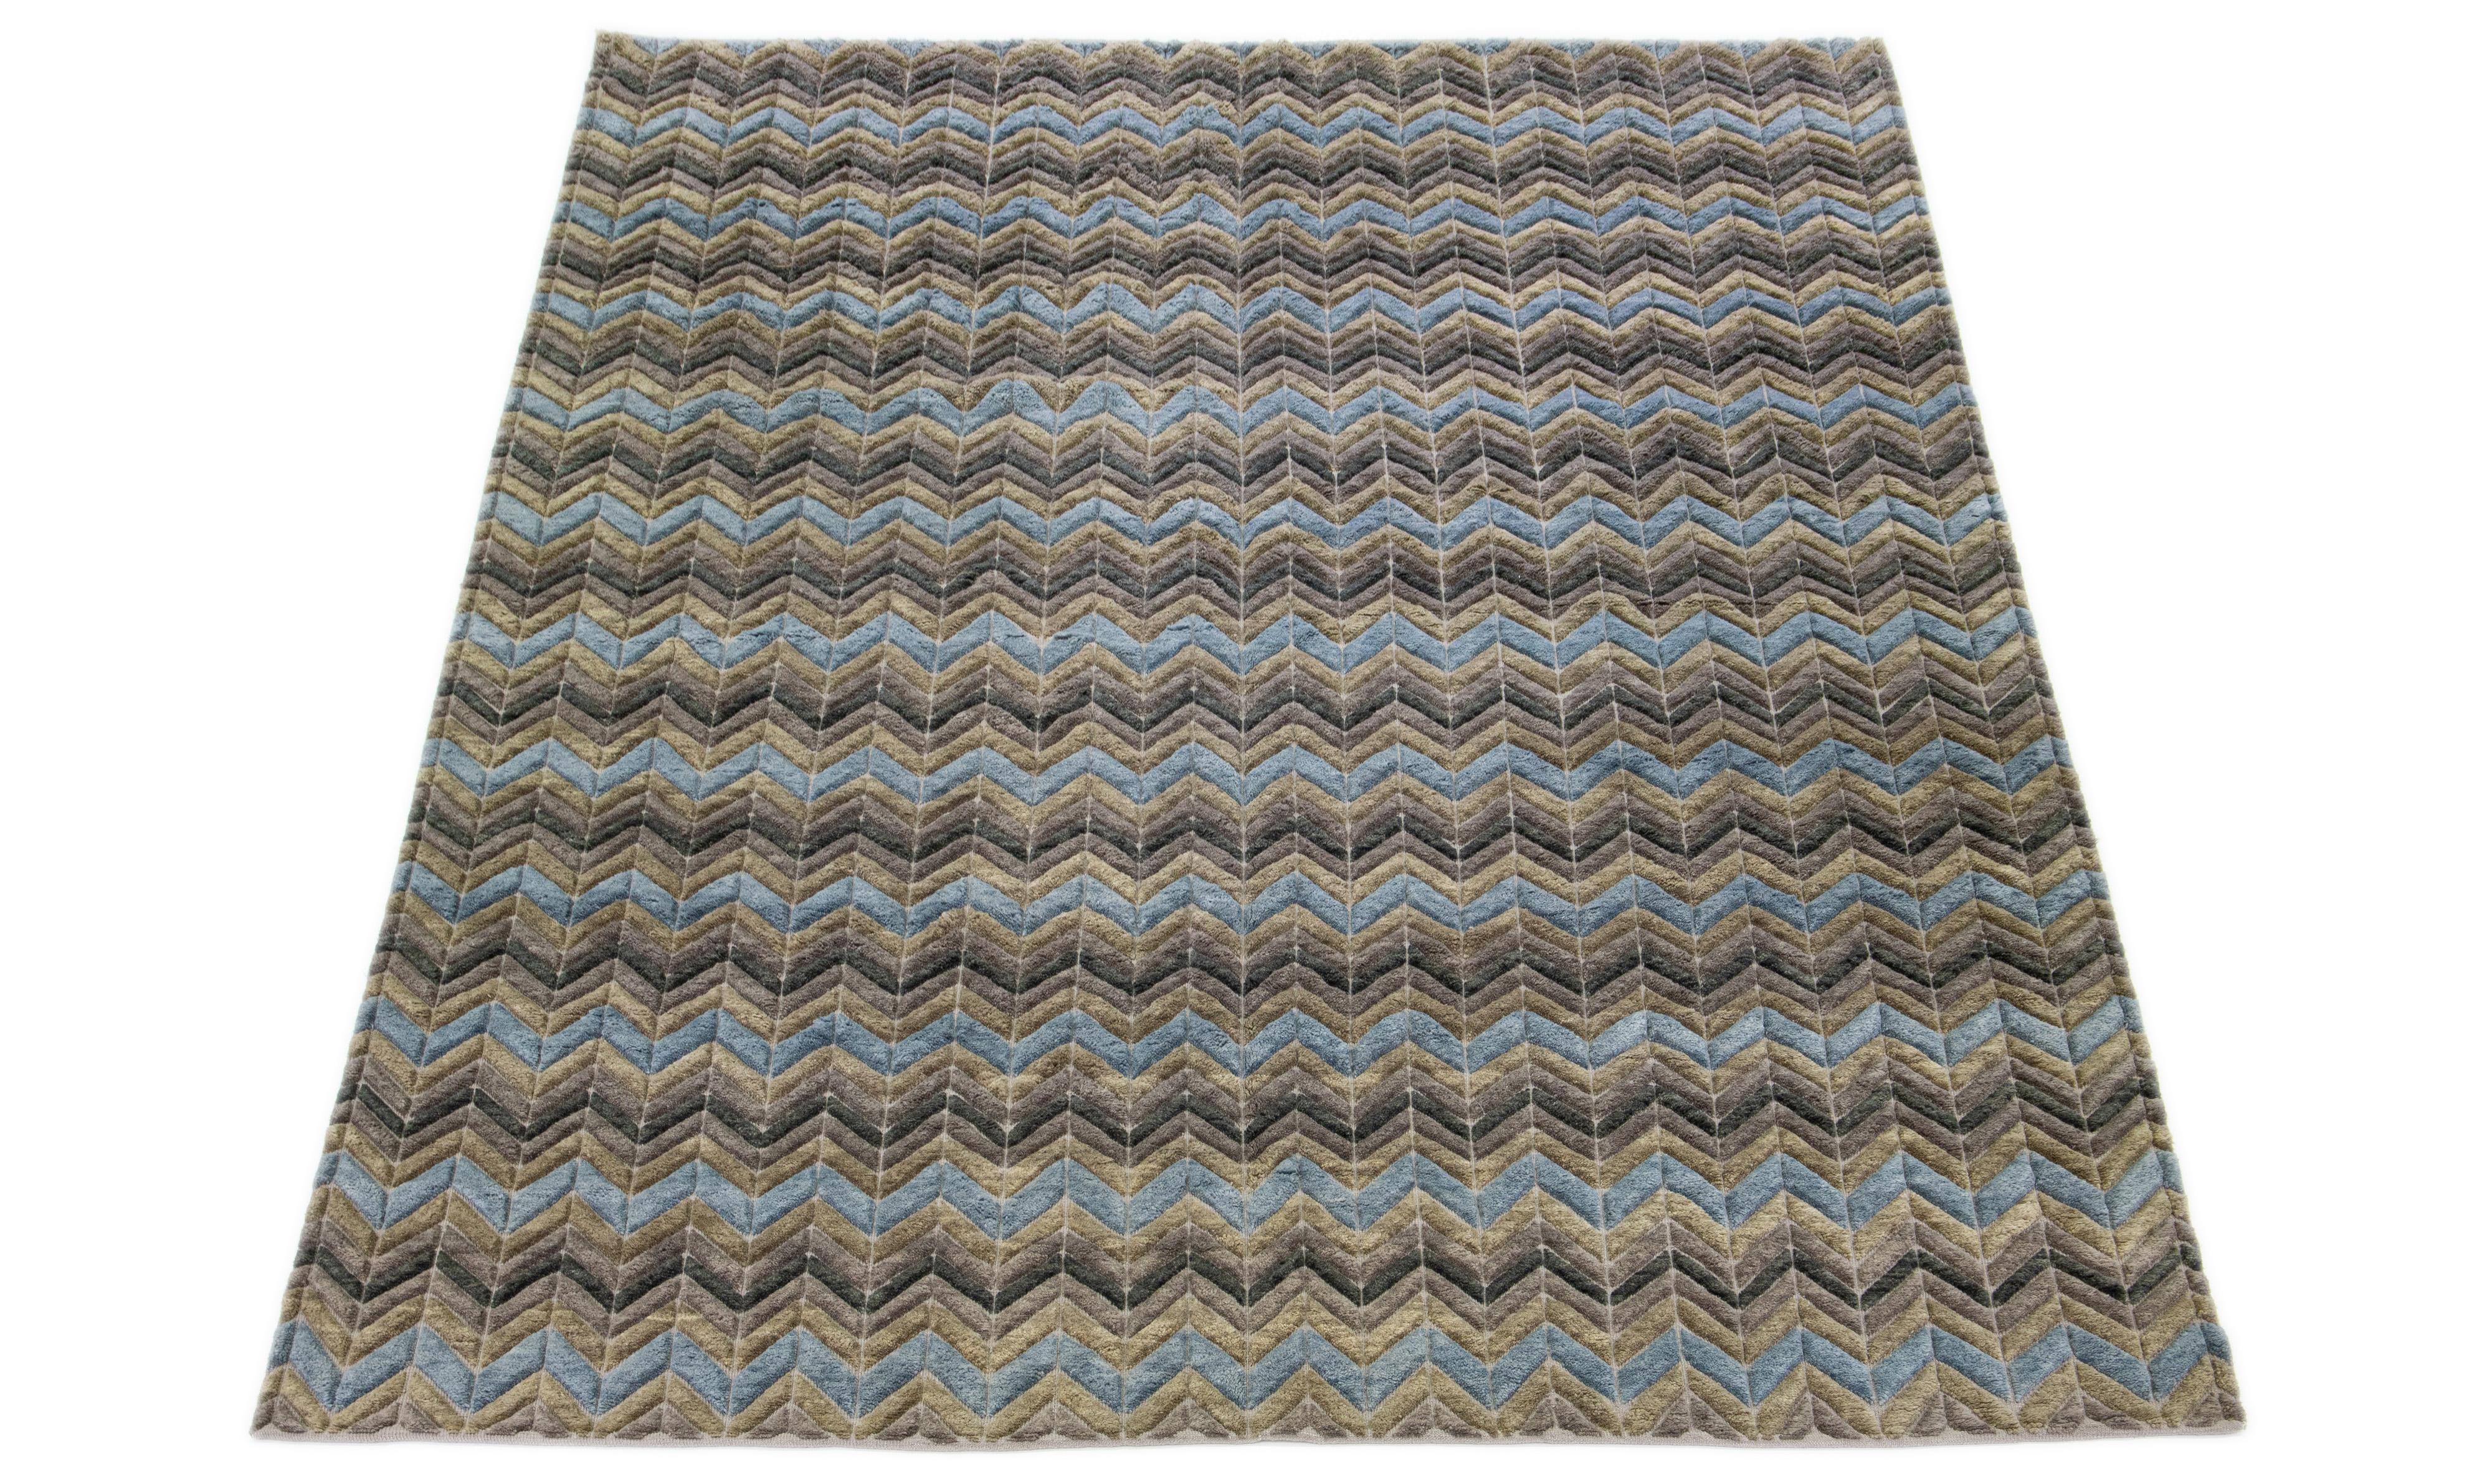 This Modern Moroccan Wool Rug Geometric Motif has an earthy color palette. The rug is meticulously hand-knotted, showcasing a striking geometric Moroccan pattern that adds a contemporary twist. The mixture of earthy shades offers a visual aesthetic